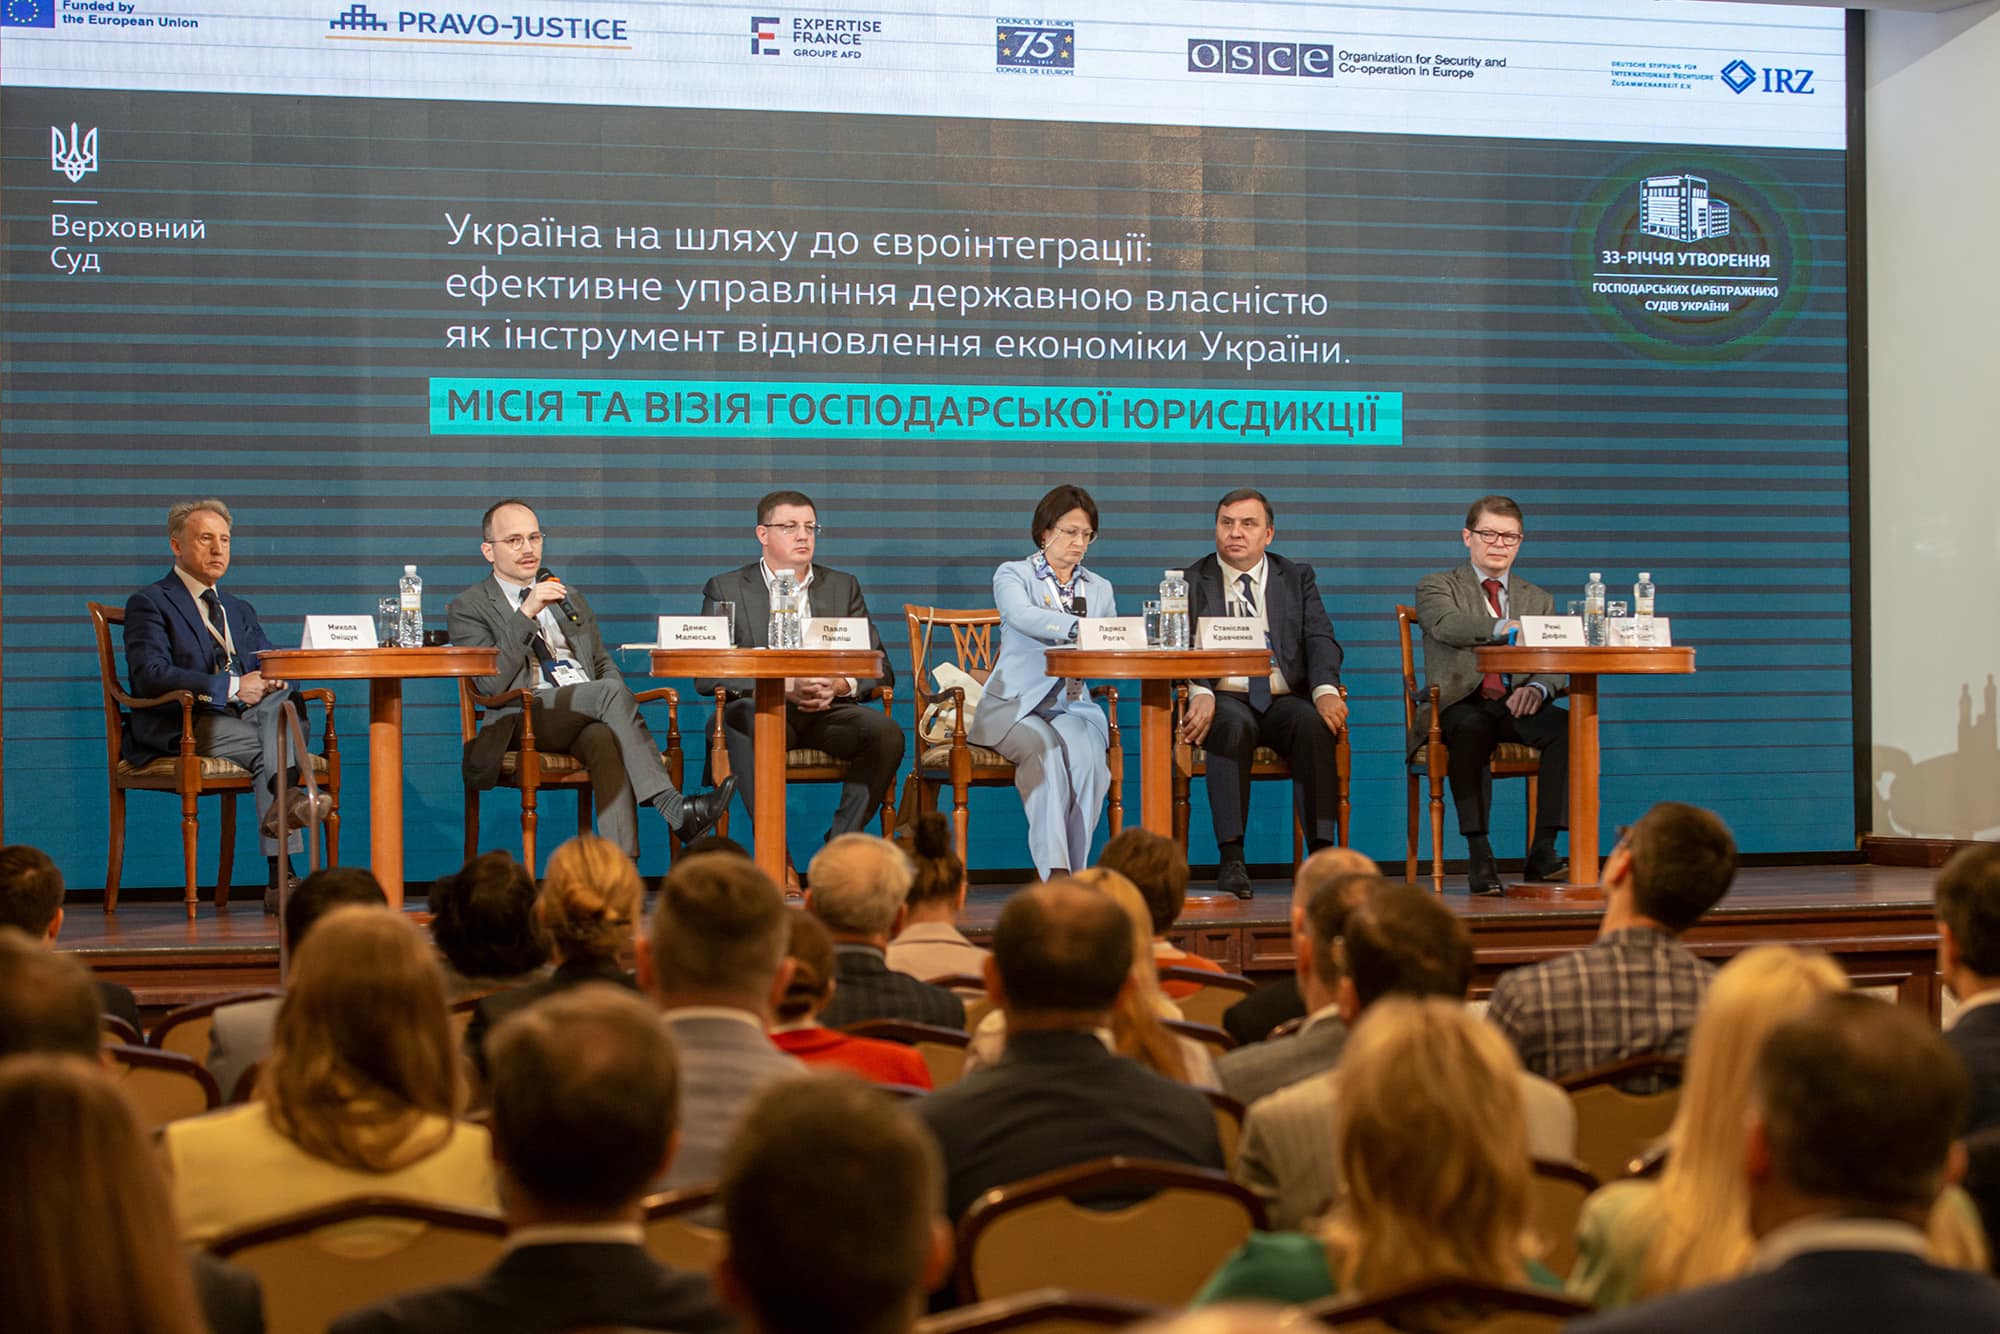 EU Project Pravo-Justice Supported the International Panel Conference of the Supreme Court